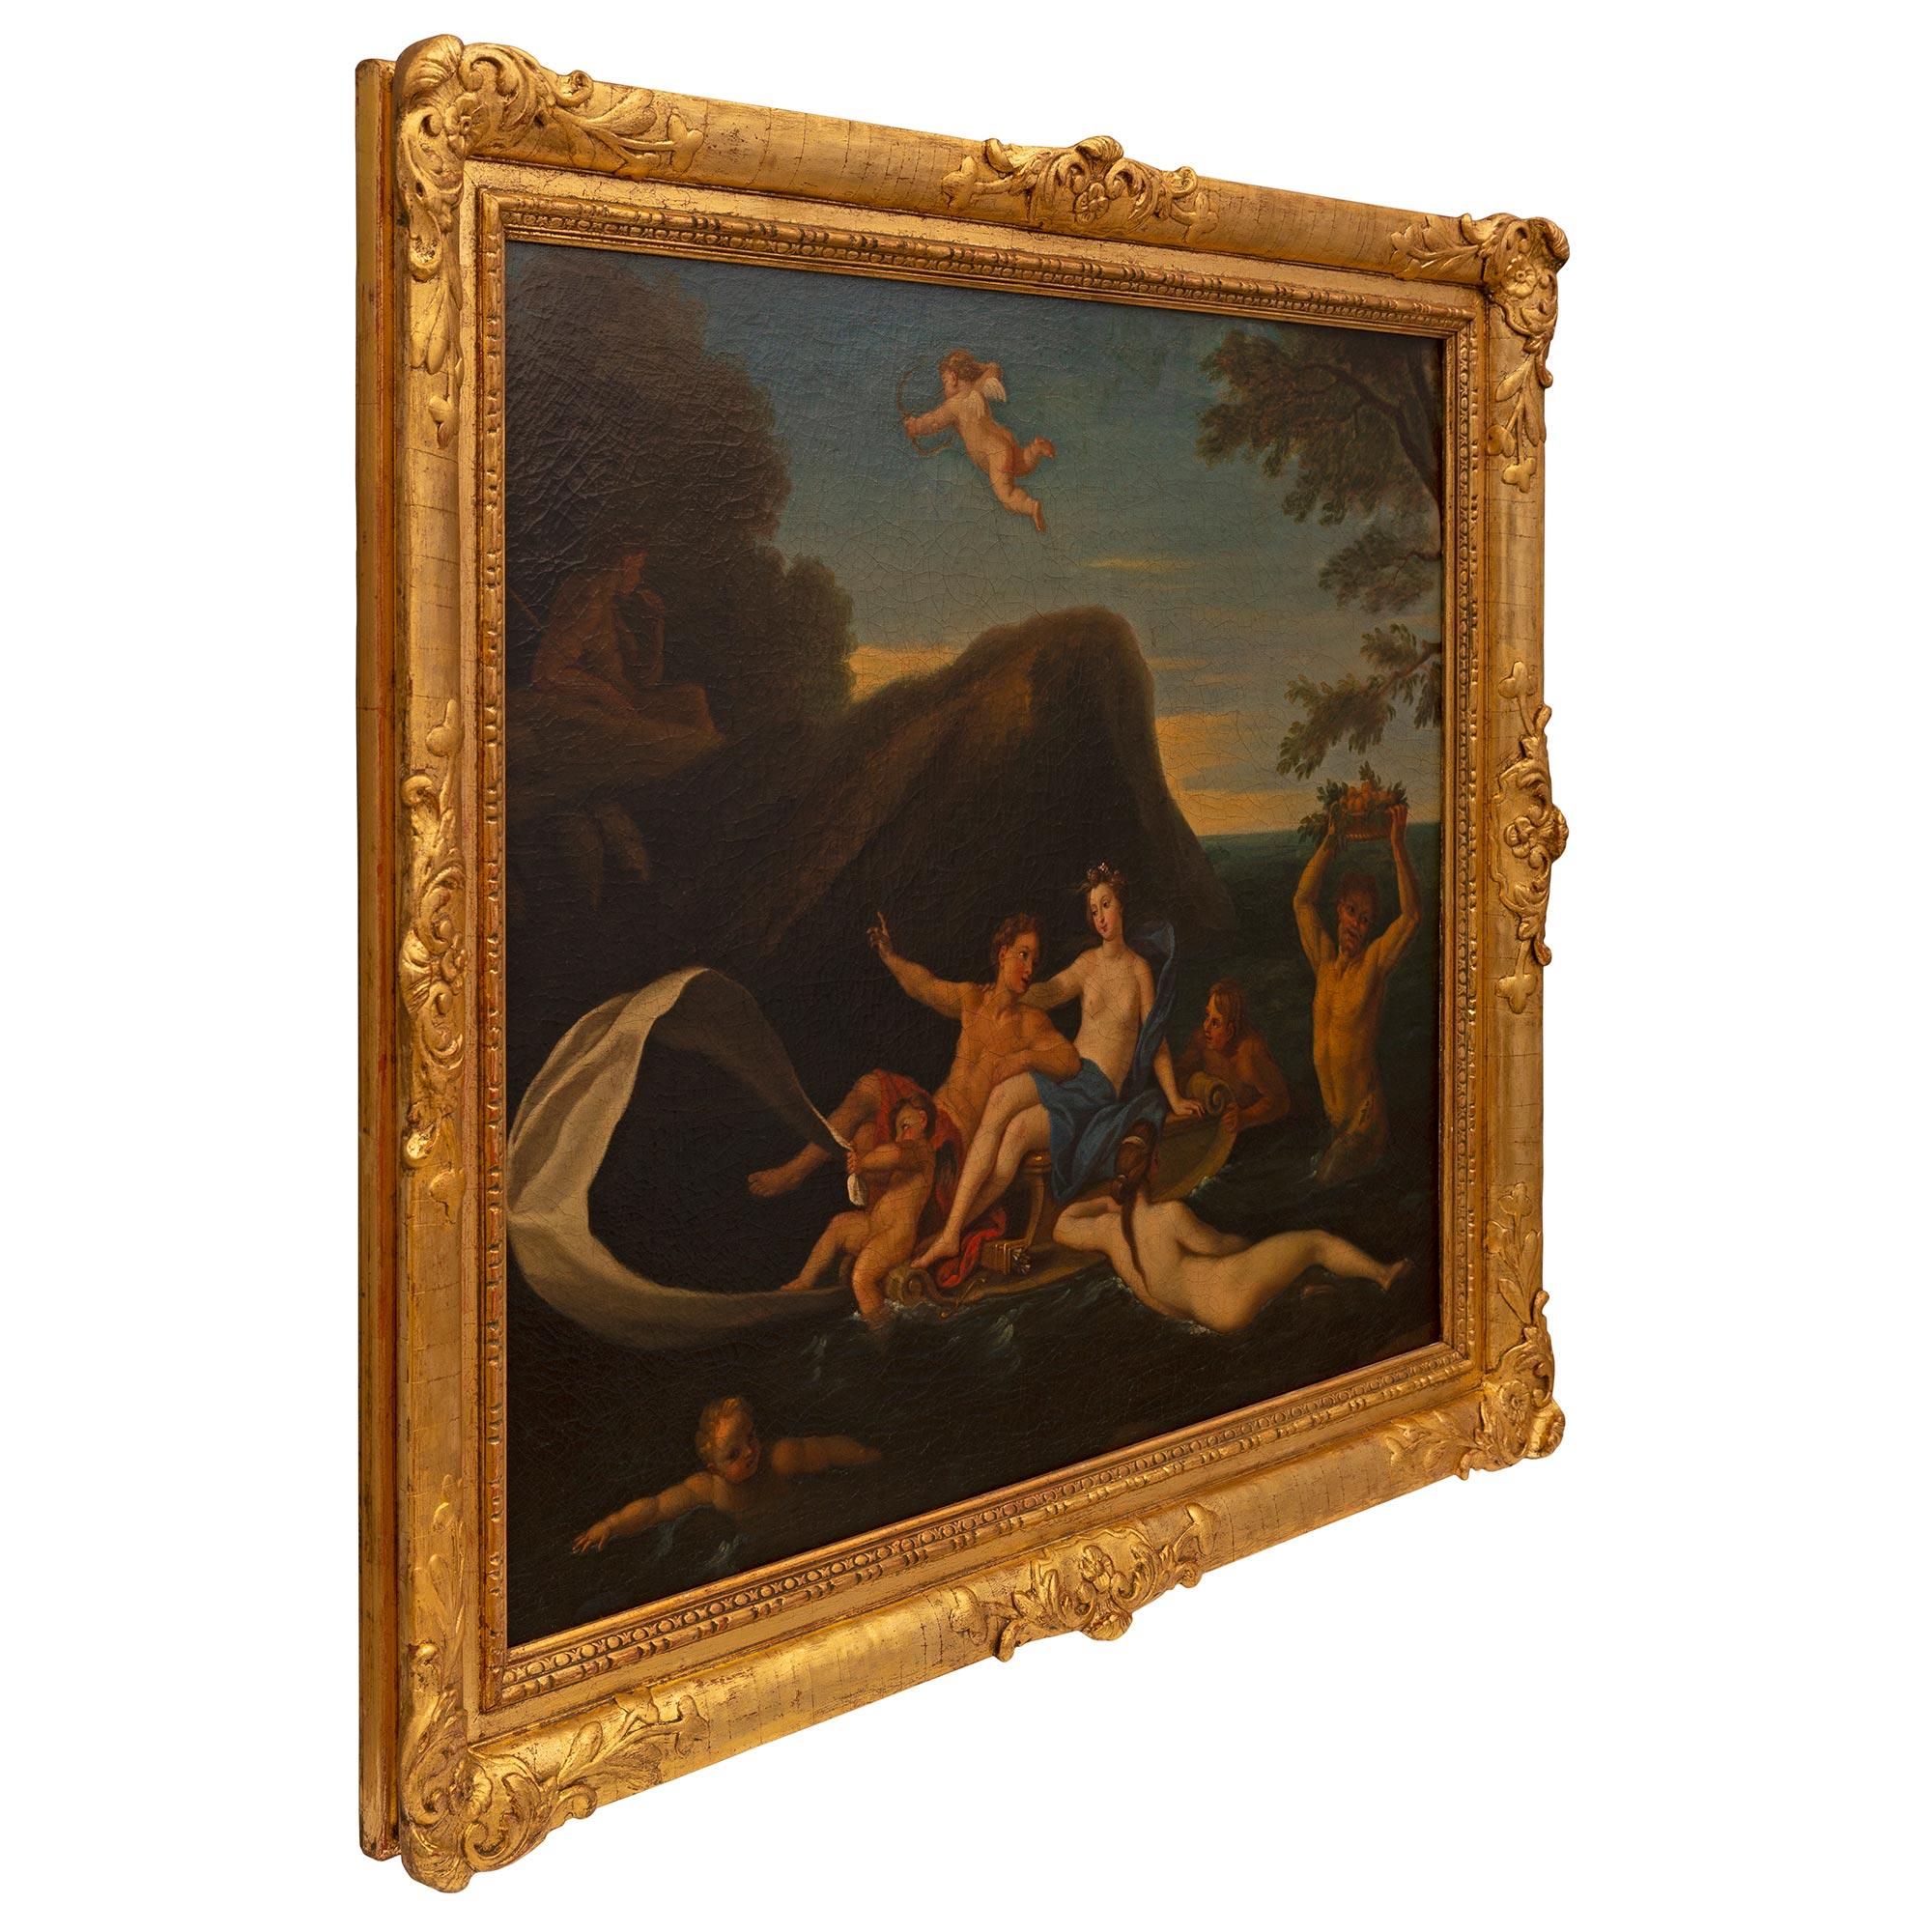 An outstanding Continental 19th century oil on canvas painting in its original giltwood frame. The beautiful painting depicts Venus at the center laying on a boat with a young man at her side and a charming cherub at the front holding a sail. An